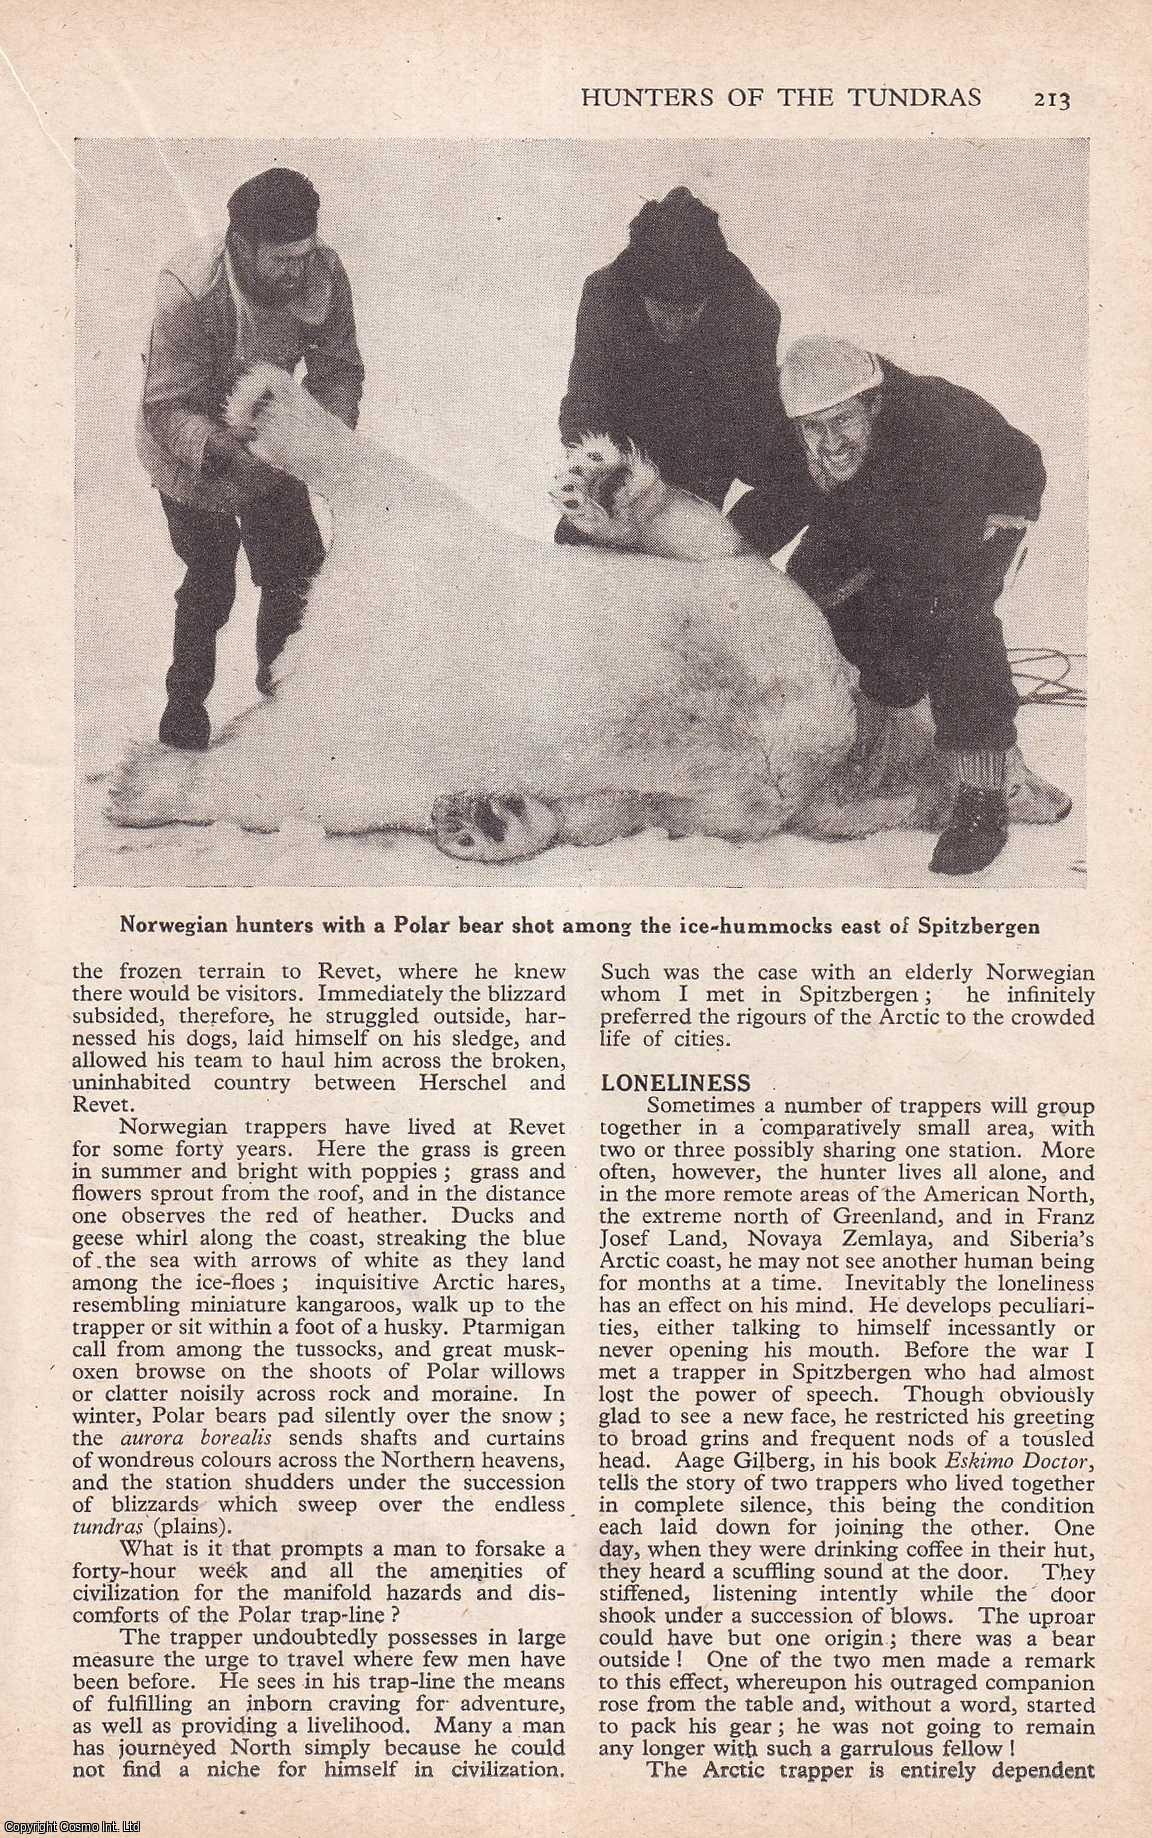 HUNTING TUNDRAS, CANADA - Arctic Tundras, Canadian Hunters of the Tundras. By Frank Illingworth. An uncommon original article from the Wide World Magazine, 1950.